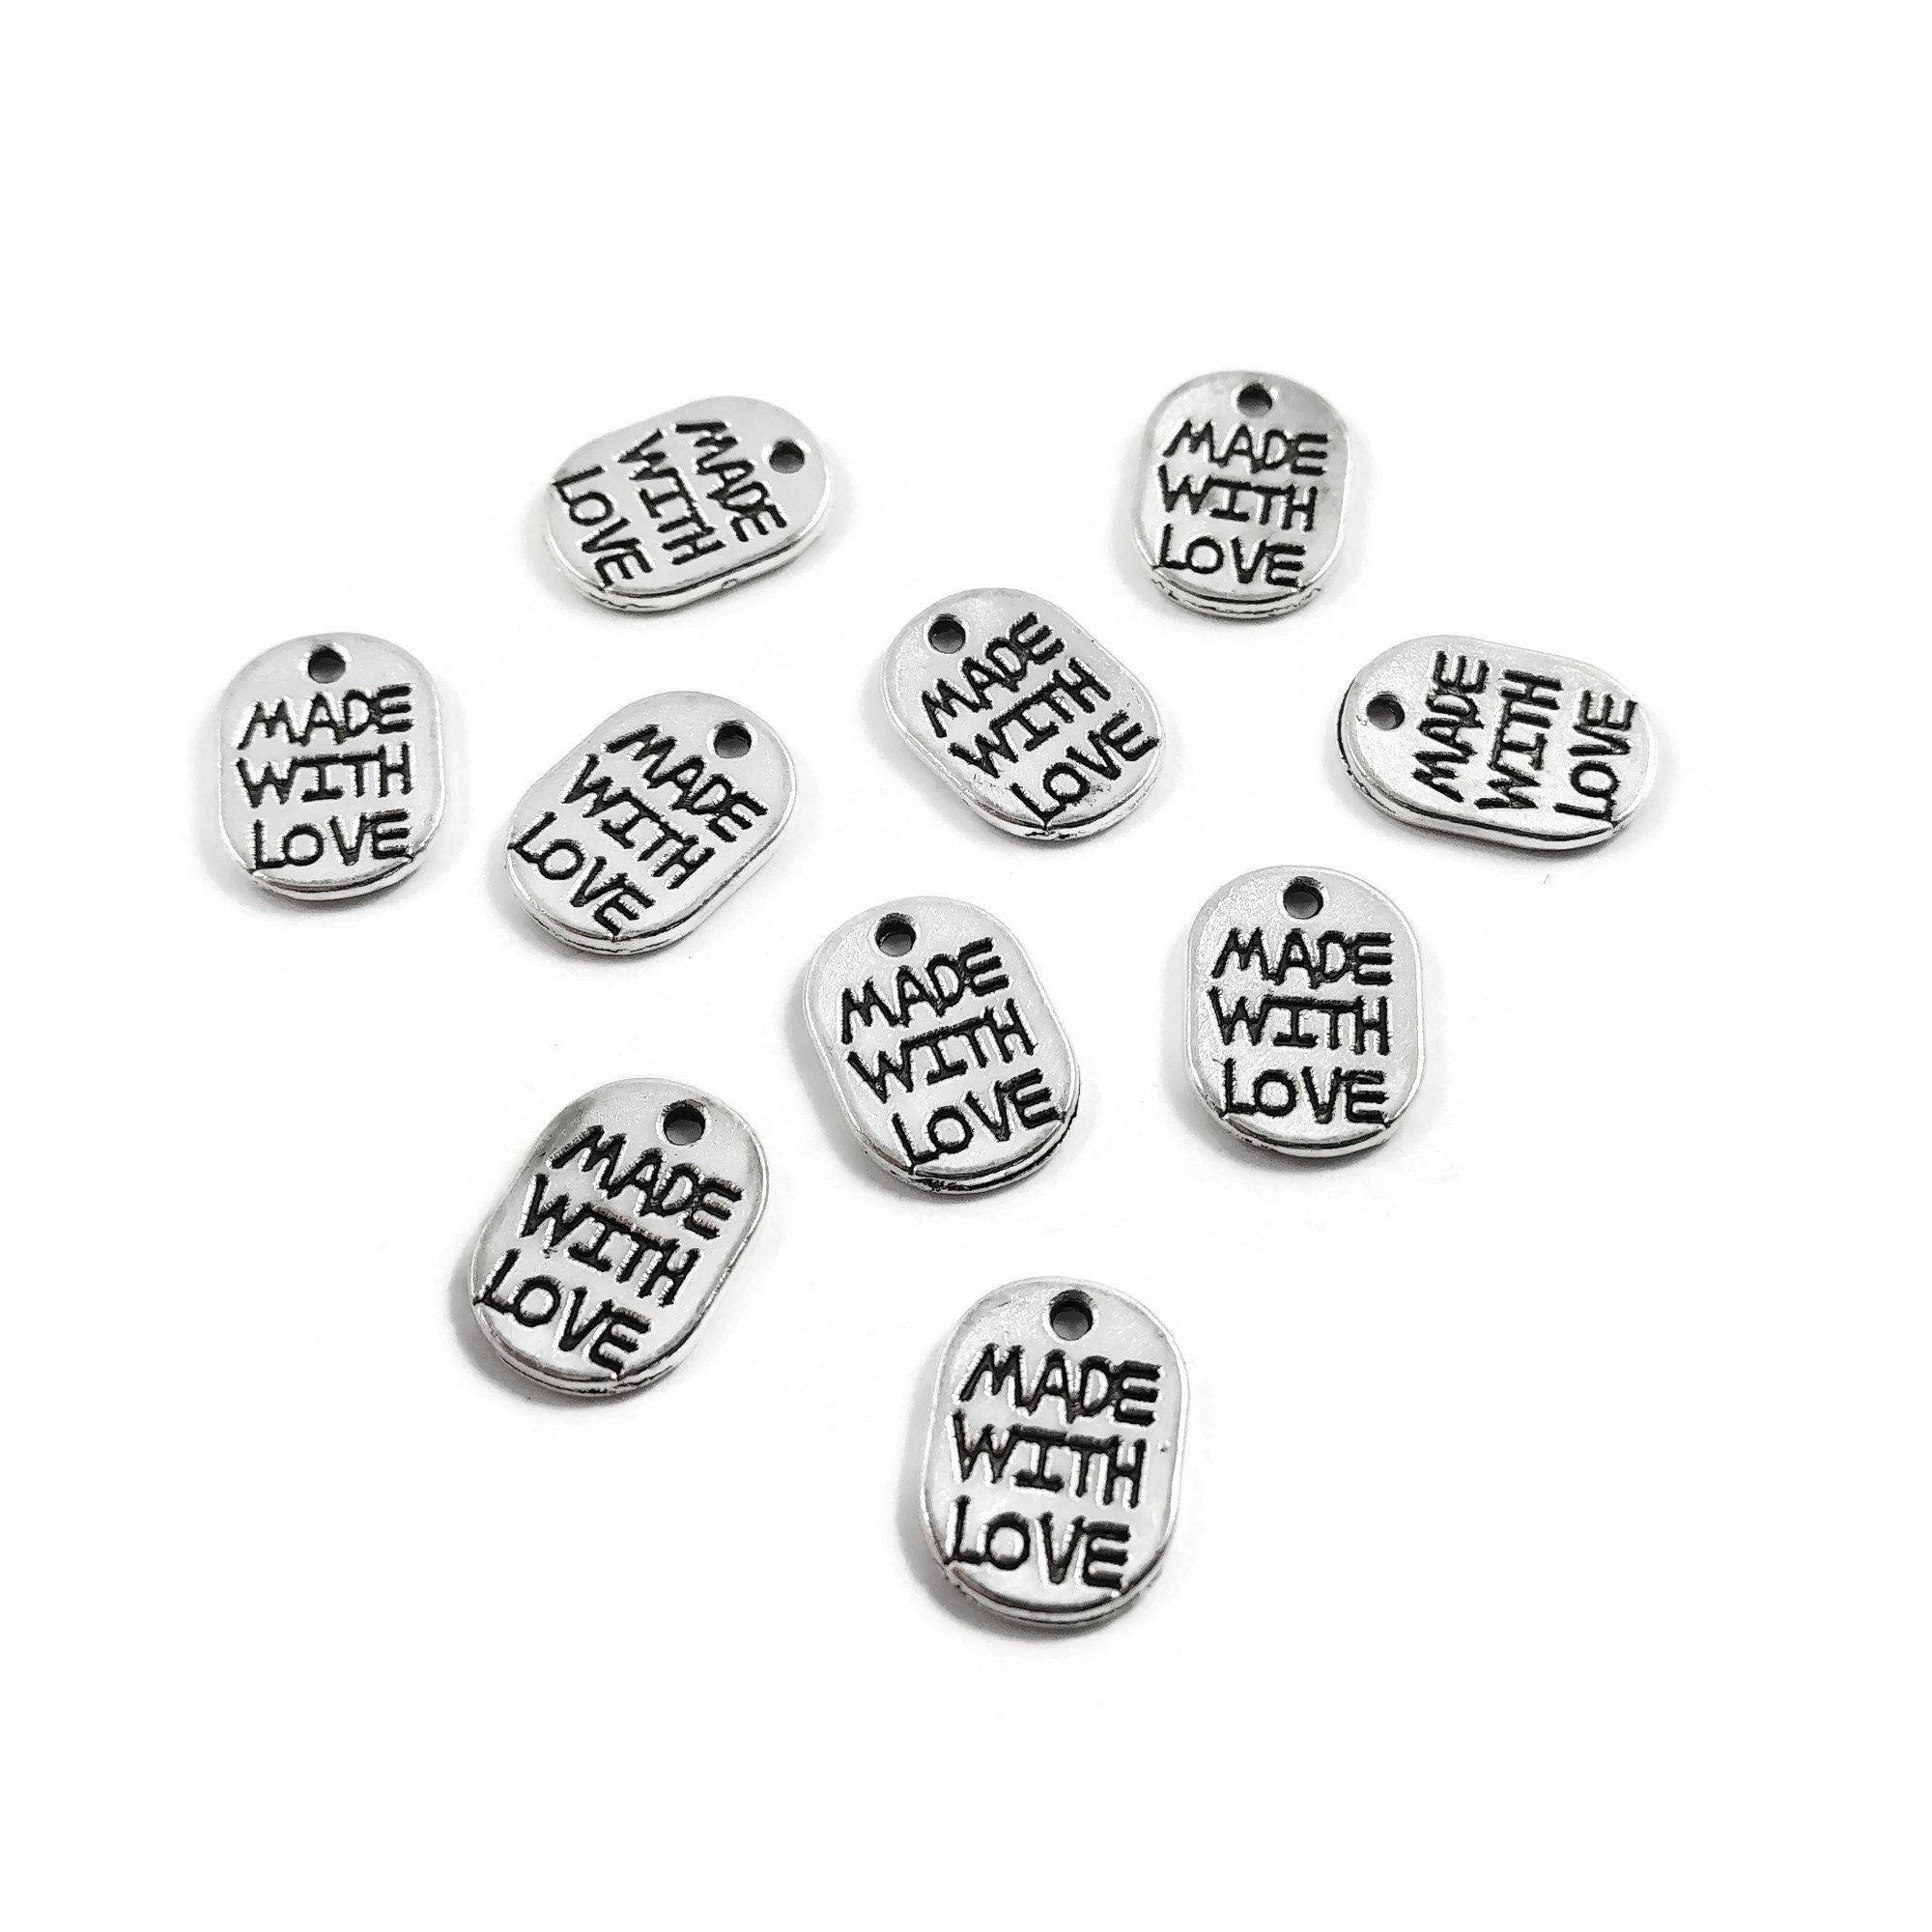 MADE WITH LOVE charms, 11mm nickel free pendants for jewelry making